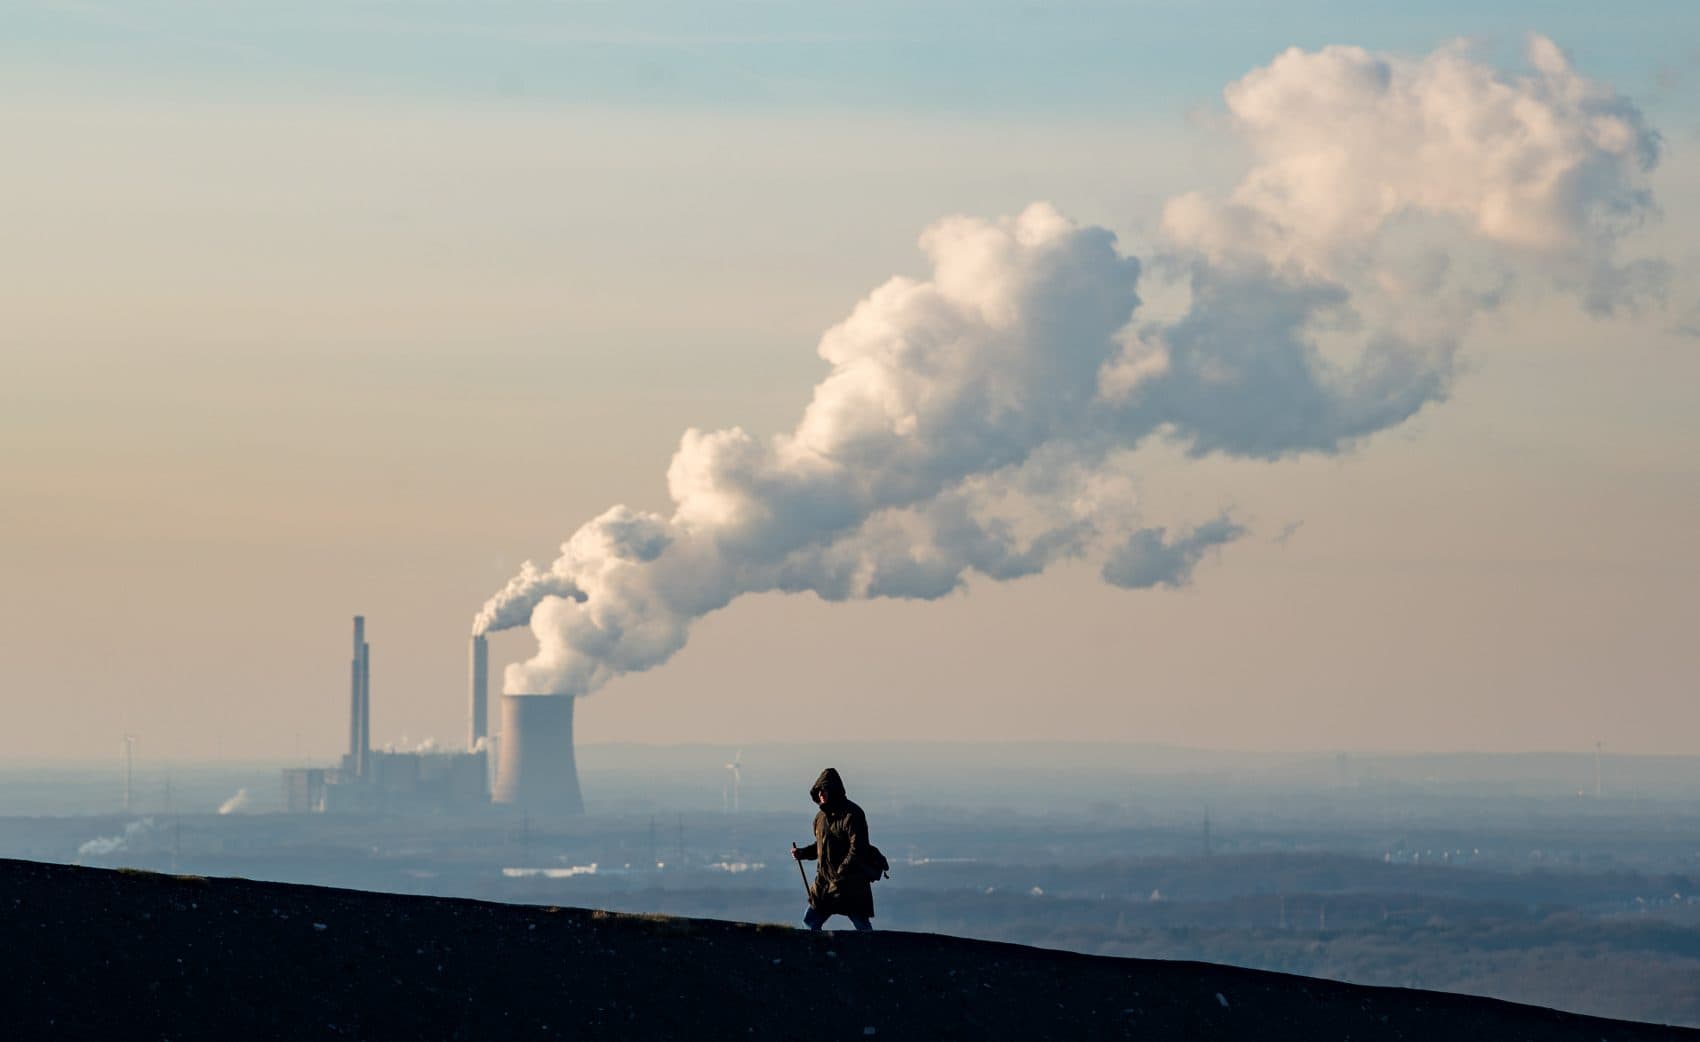 Steam and exhaust rise from a power plant on Jan. 6, 2017 in Oberhausen, Germany. According to a report released by the European Copernicus Climate Change Service, 2016 is likely to have been the hottest year since global temperatures were recorded in the 19th century. (Lukas Schulze/Getty Images)